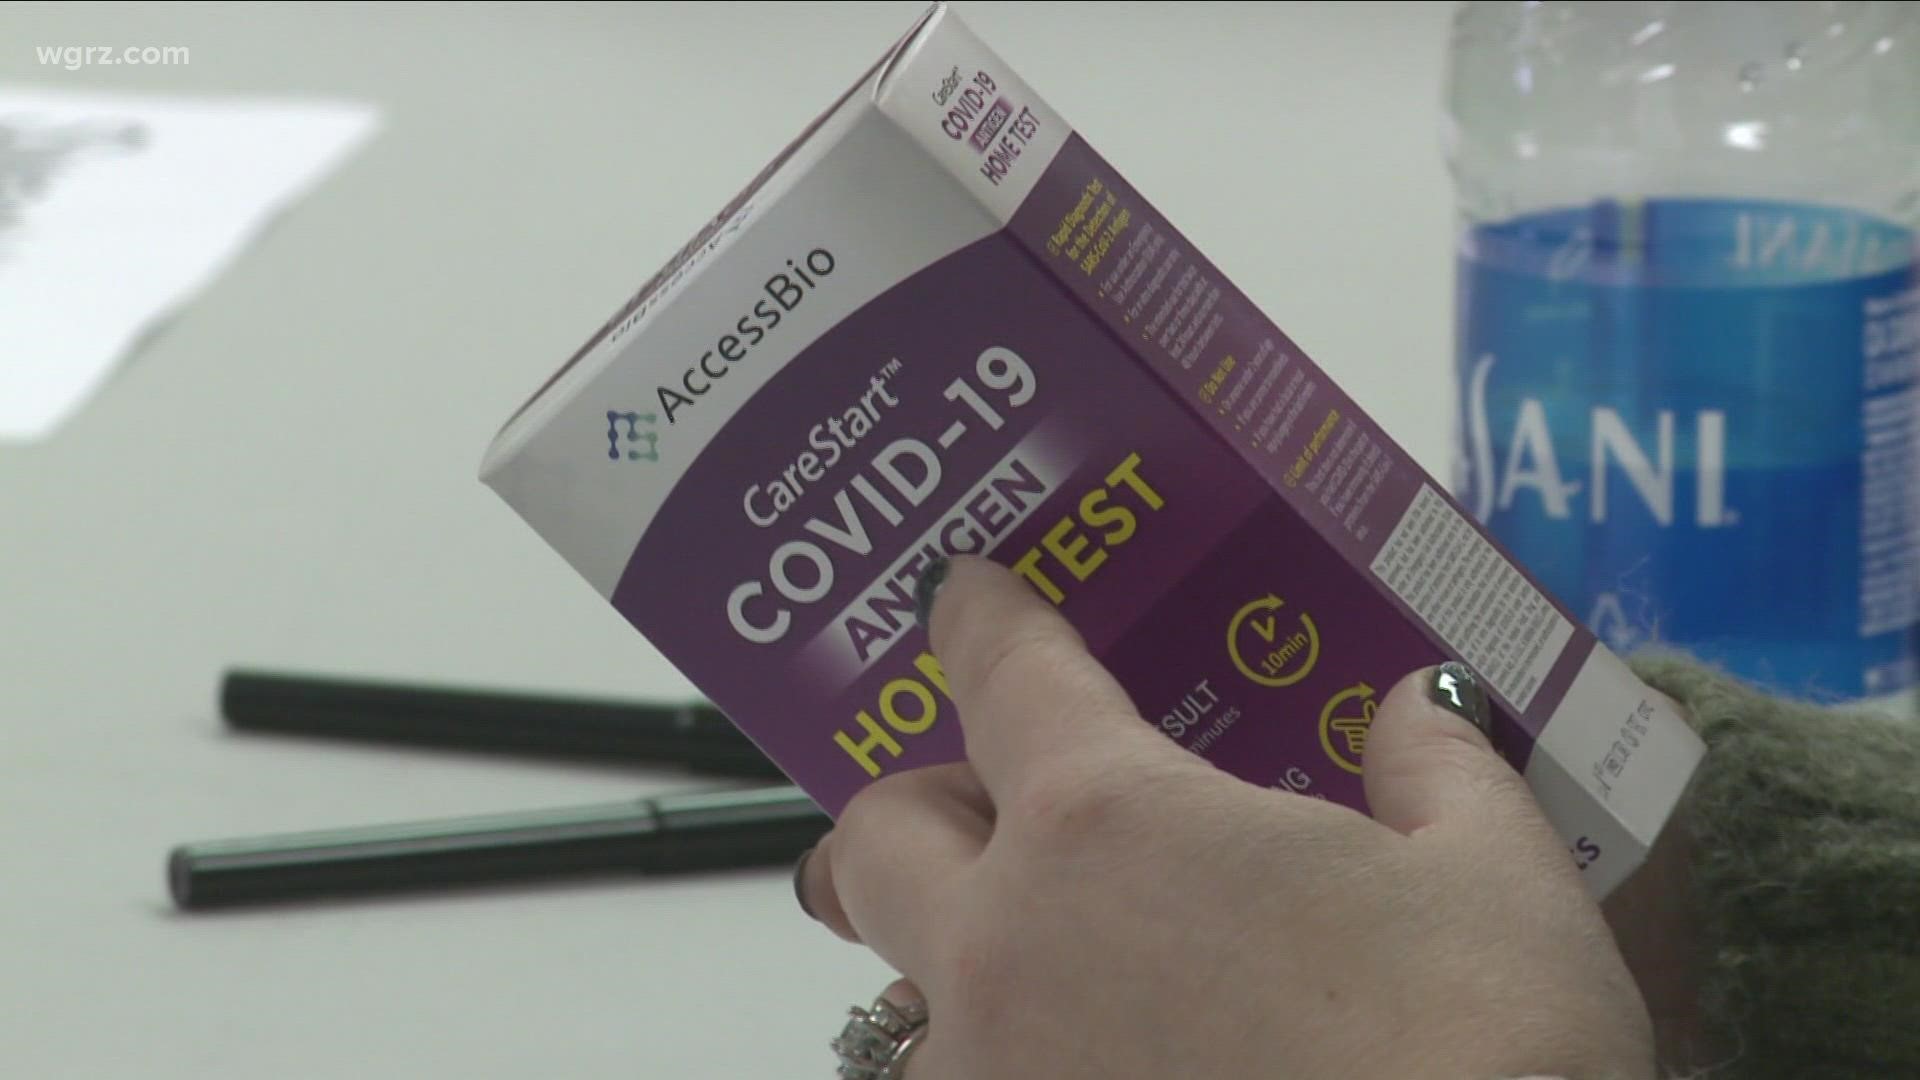 The state and local municipalities are trying to address the shortage of at-home tests, by giving away thousands of kits the next few days.